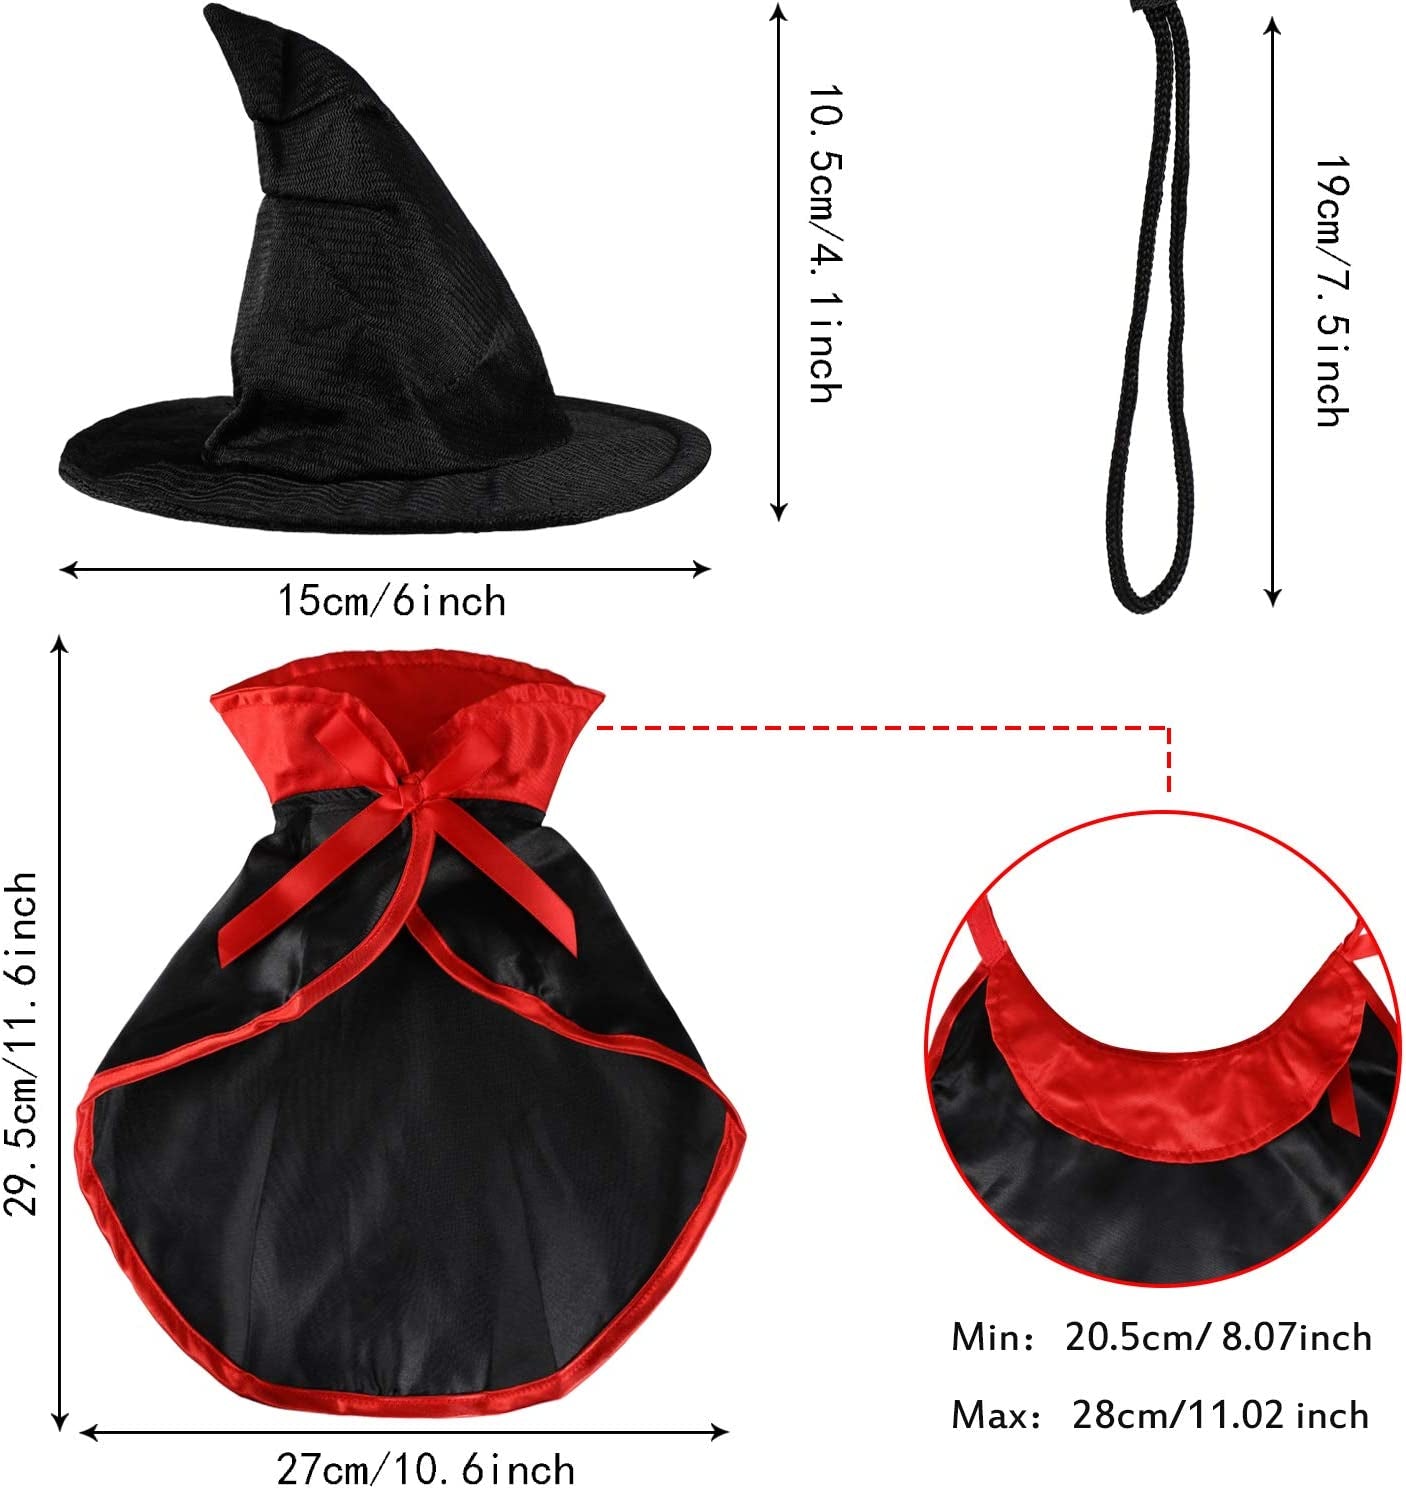 Frienda 2 Pieces Halloween Pet Costume Set, Include Pet Cape Vampire Costume Cloak and Pet Witch Hat for Cat Puppy Cosplay Party Supplies (Basic)